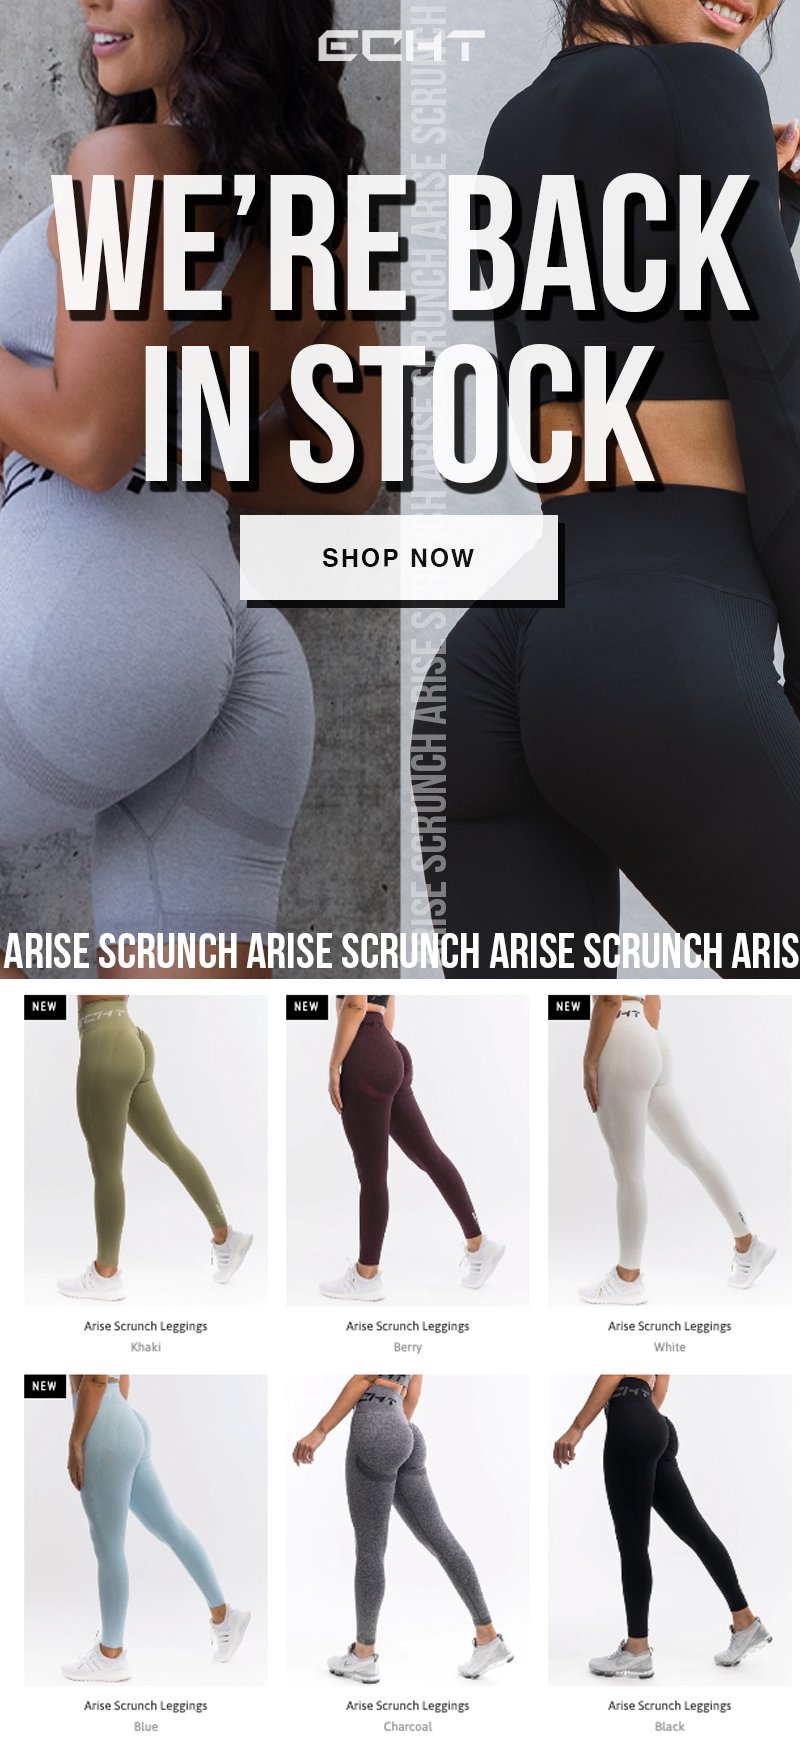 Echt - The Arise Scrunch Shorts have returned for a